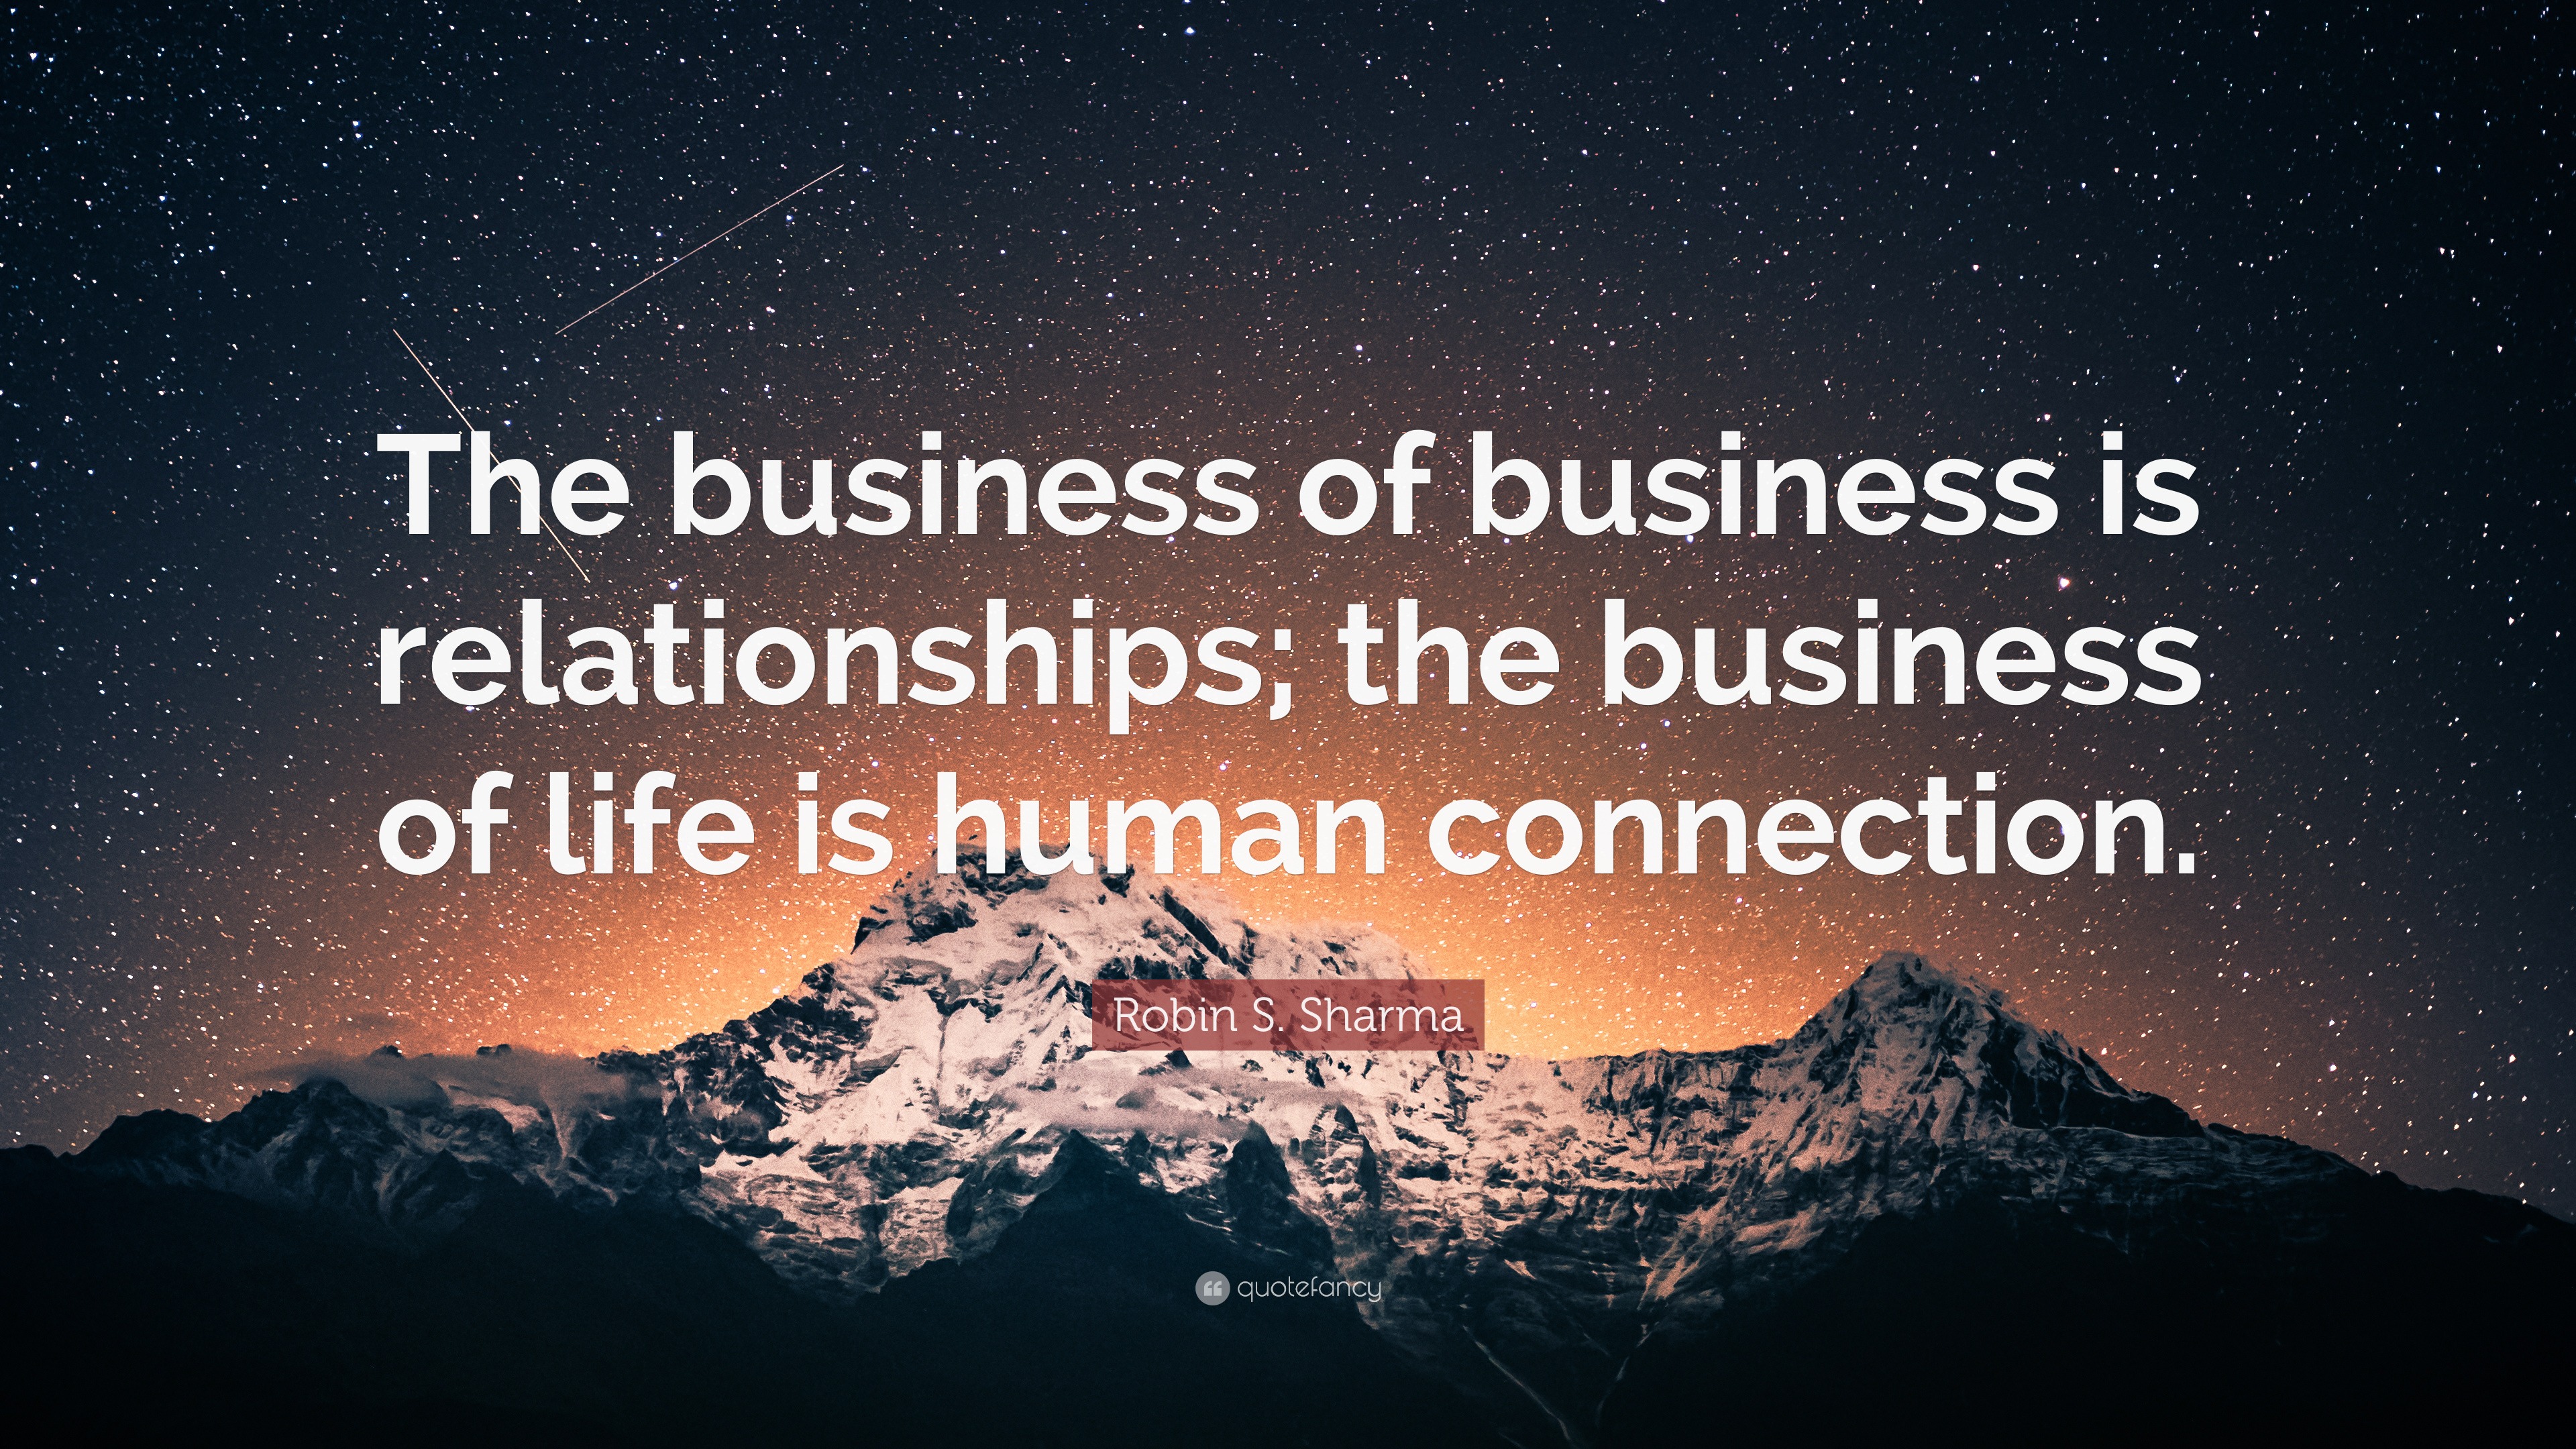 Robin S. Sharma Quote “The business of business is